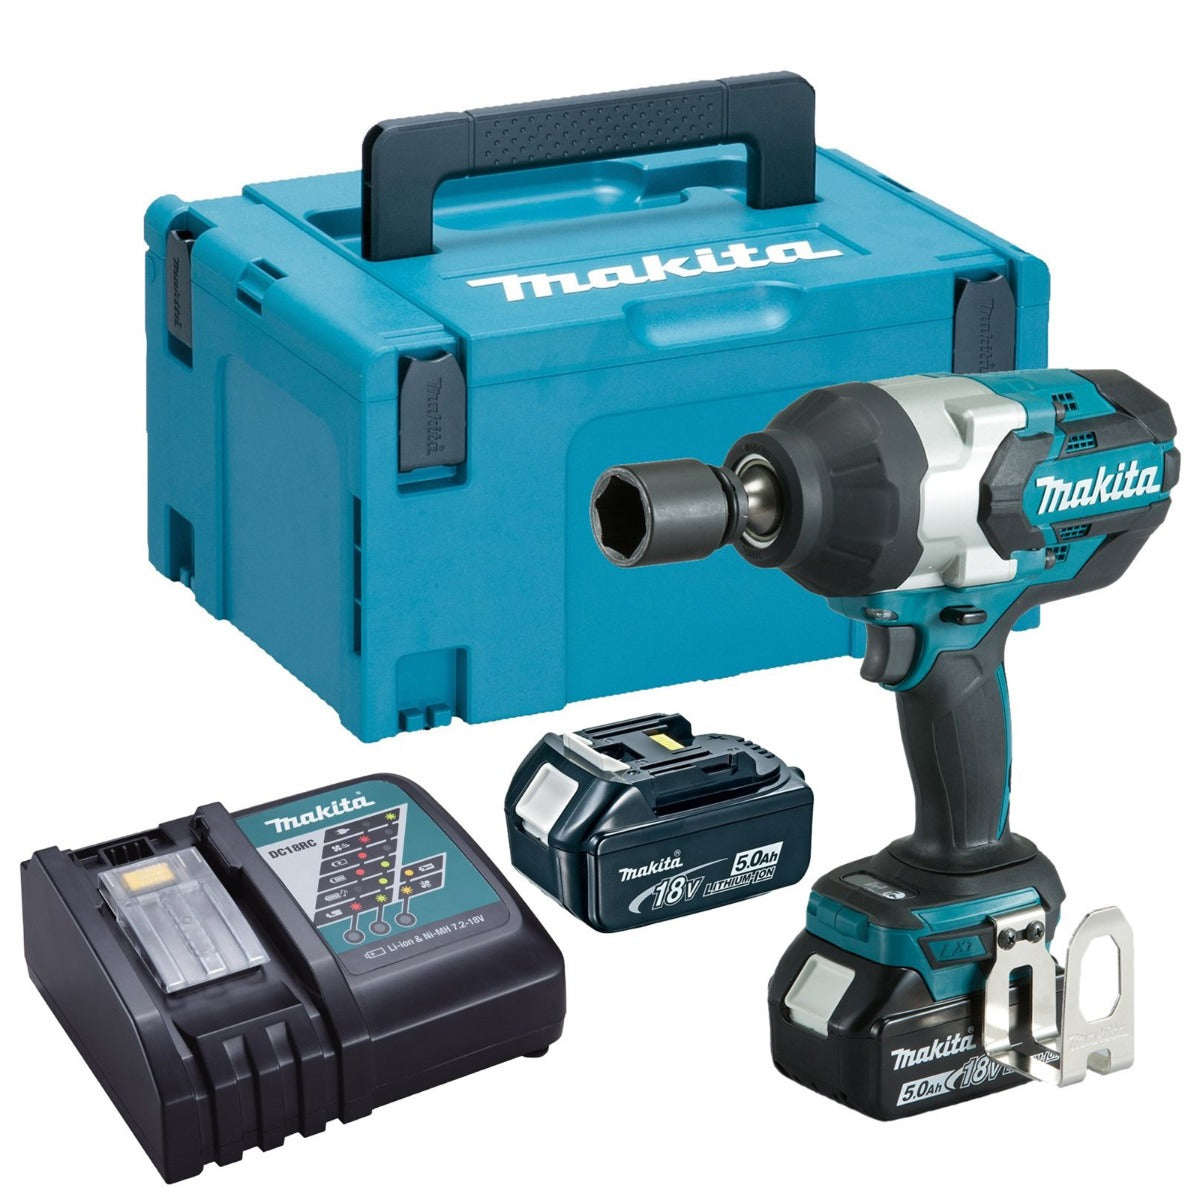 Makita DTW1002RTJ 18v LXT Brushless Impact Wrench 2x 5.0Ah